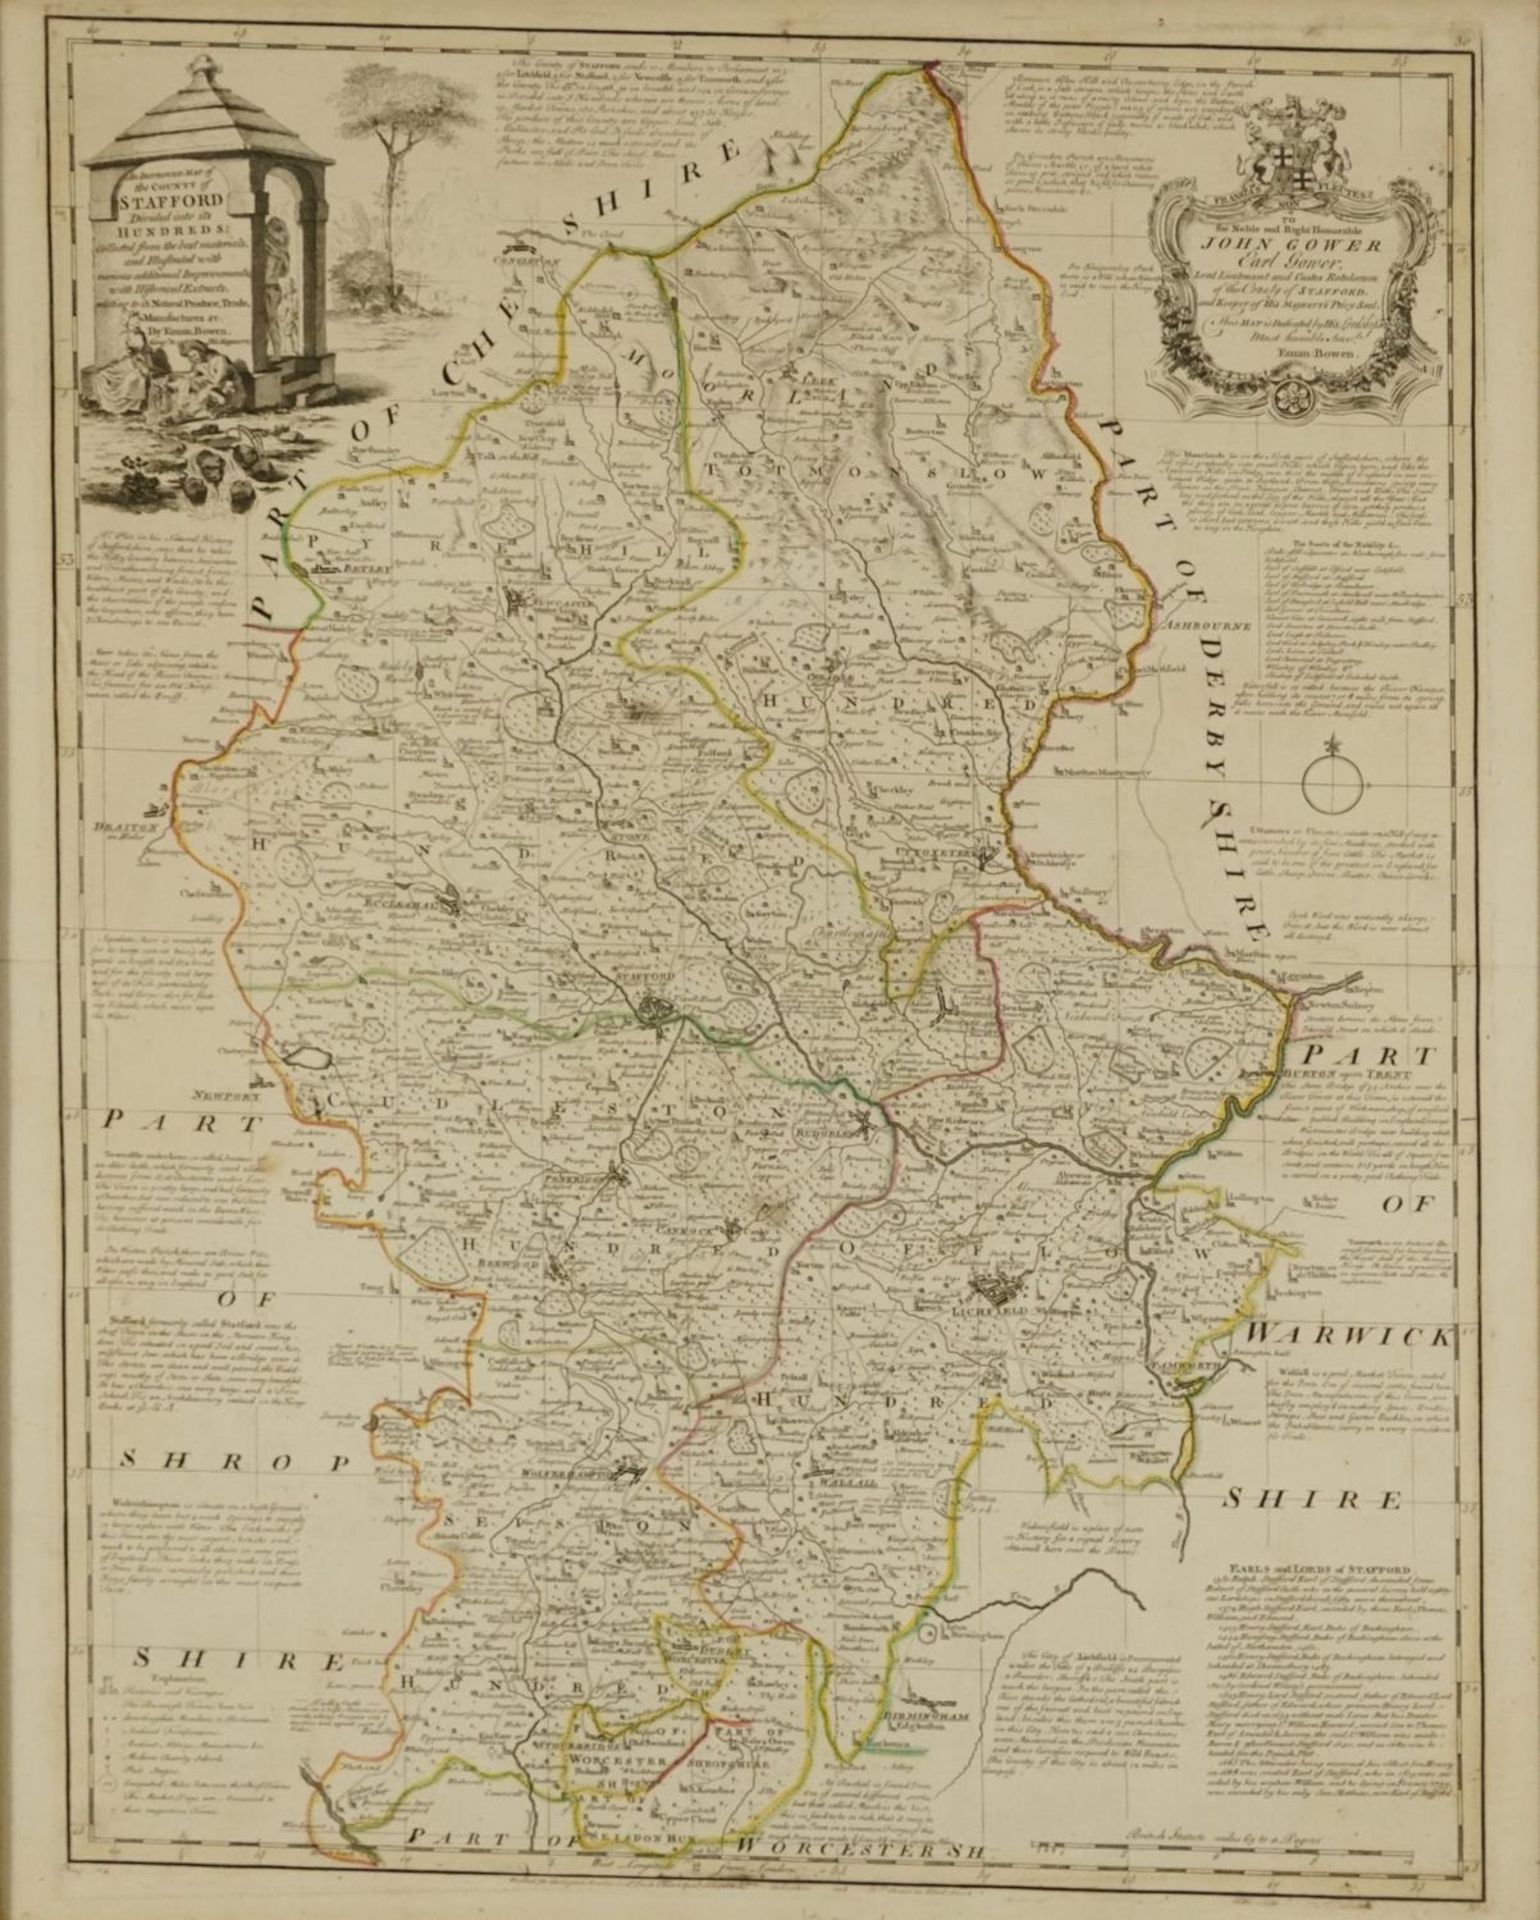 An Improved Map of the County of Stafford, hand coloured antique map by Emmanuel Bowen, The Graves